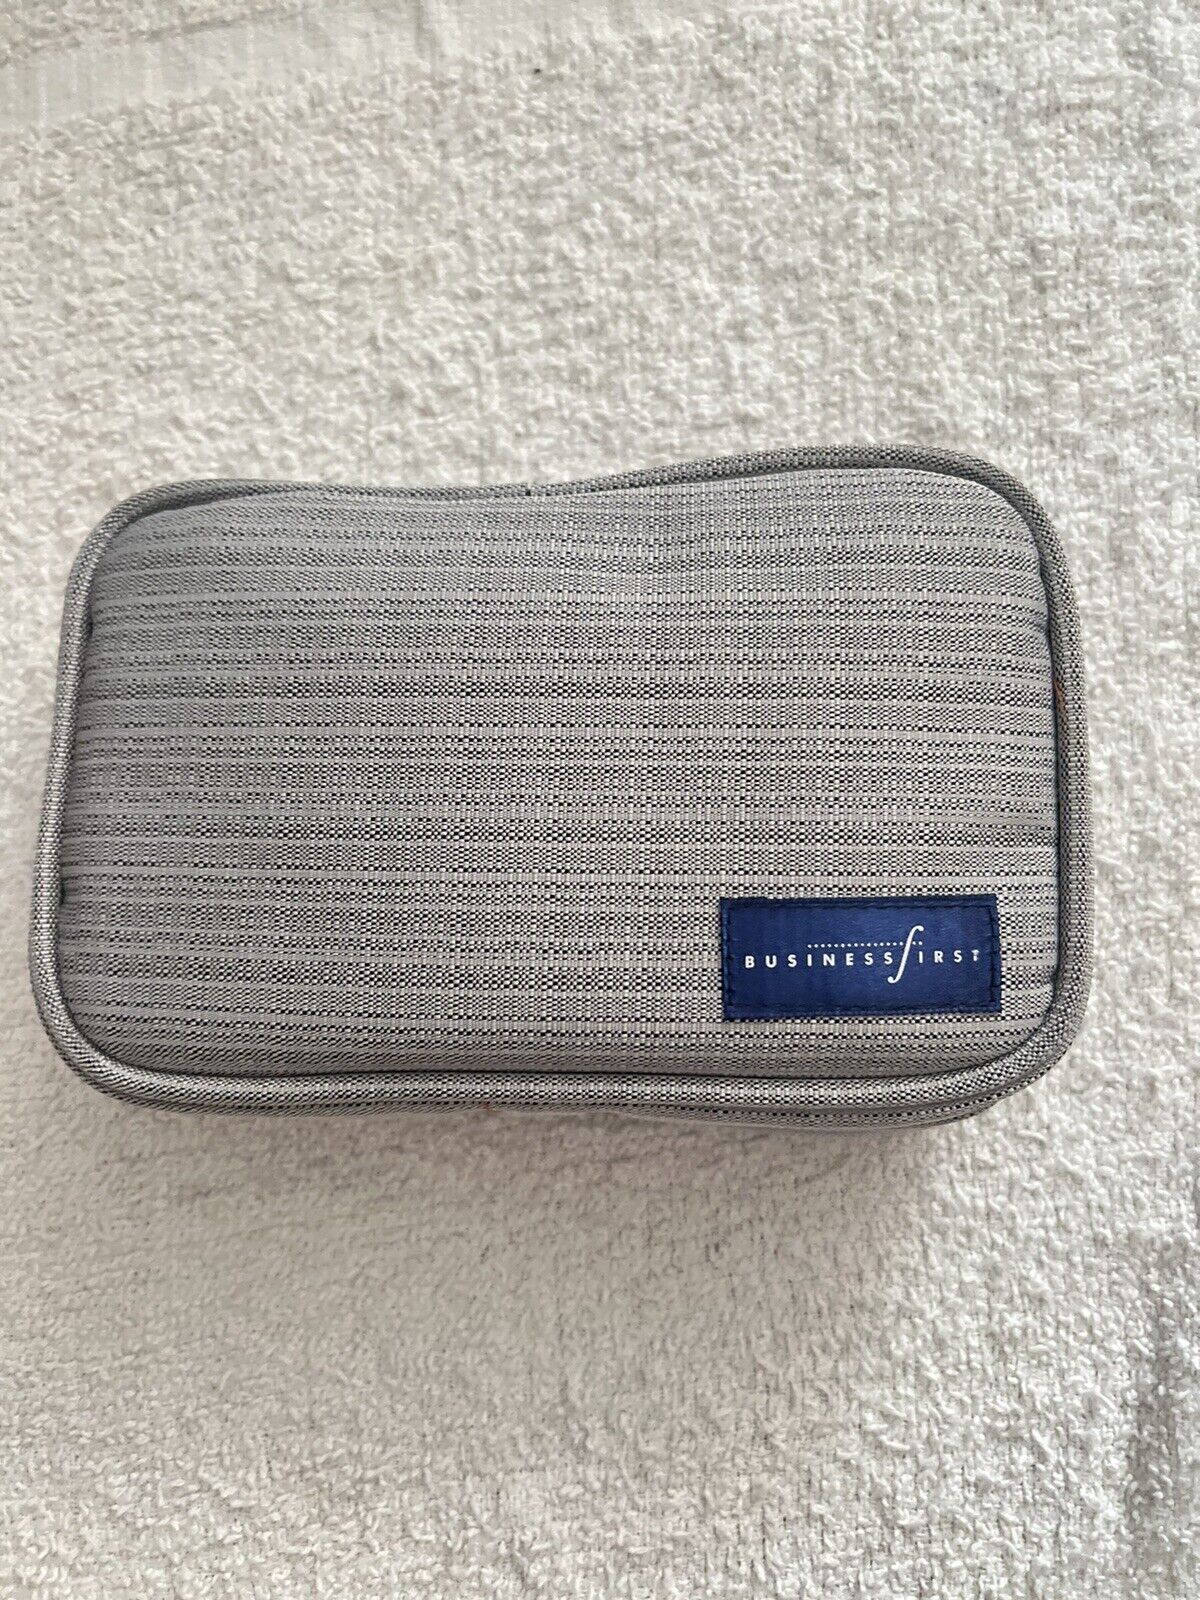 Continental Airlines Business First Class Travel Amenity Kit Unused Collectible